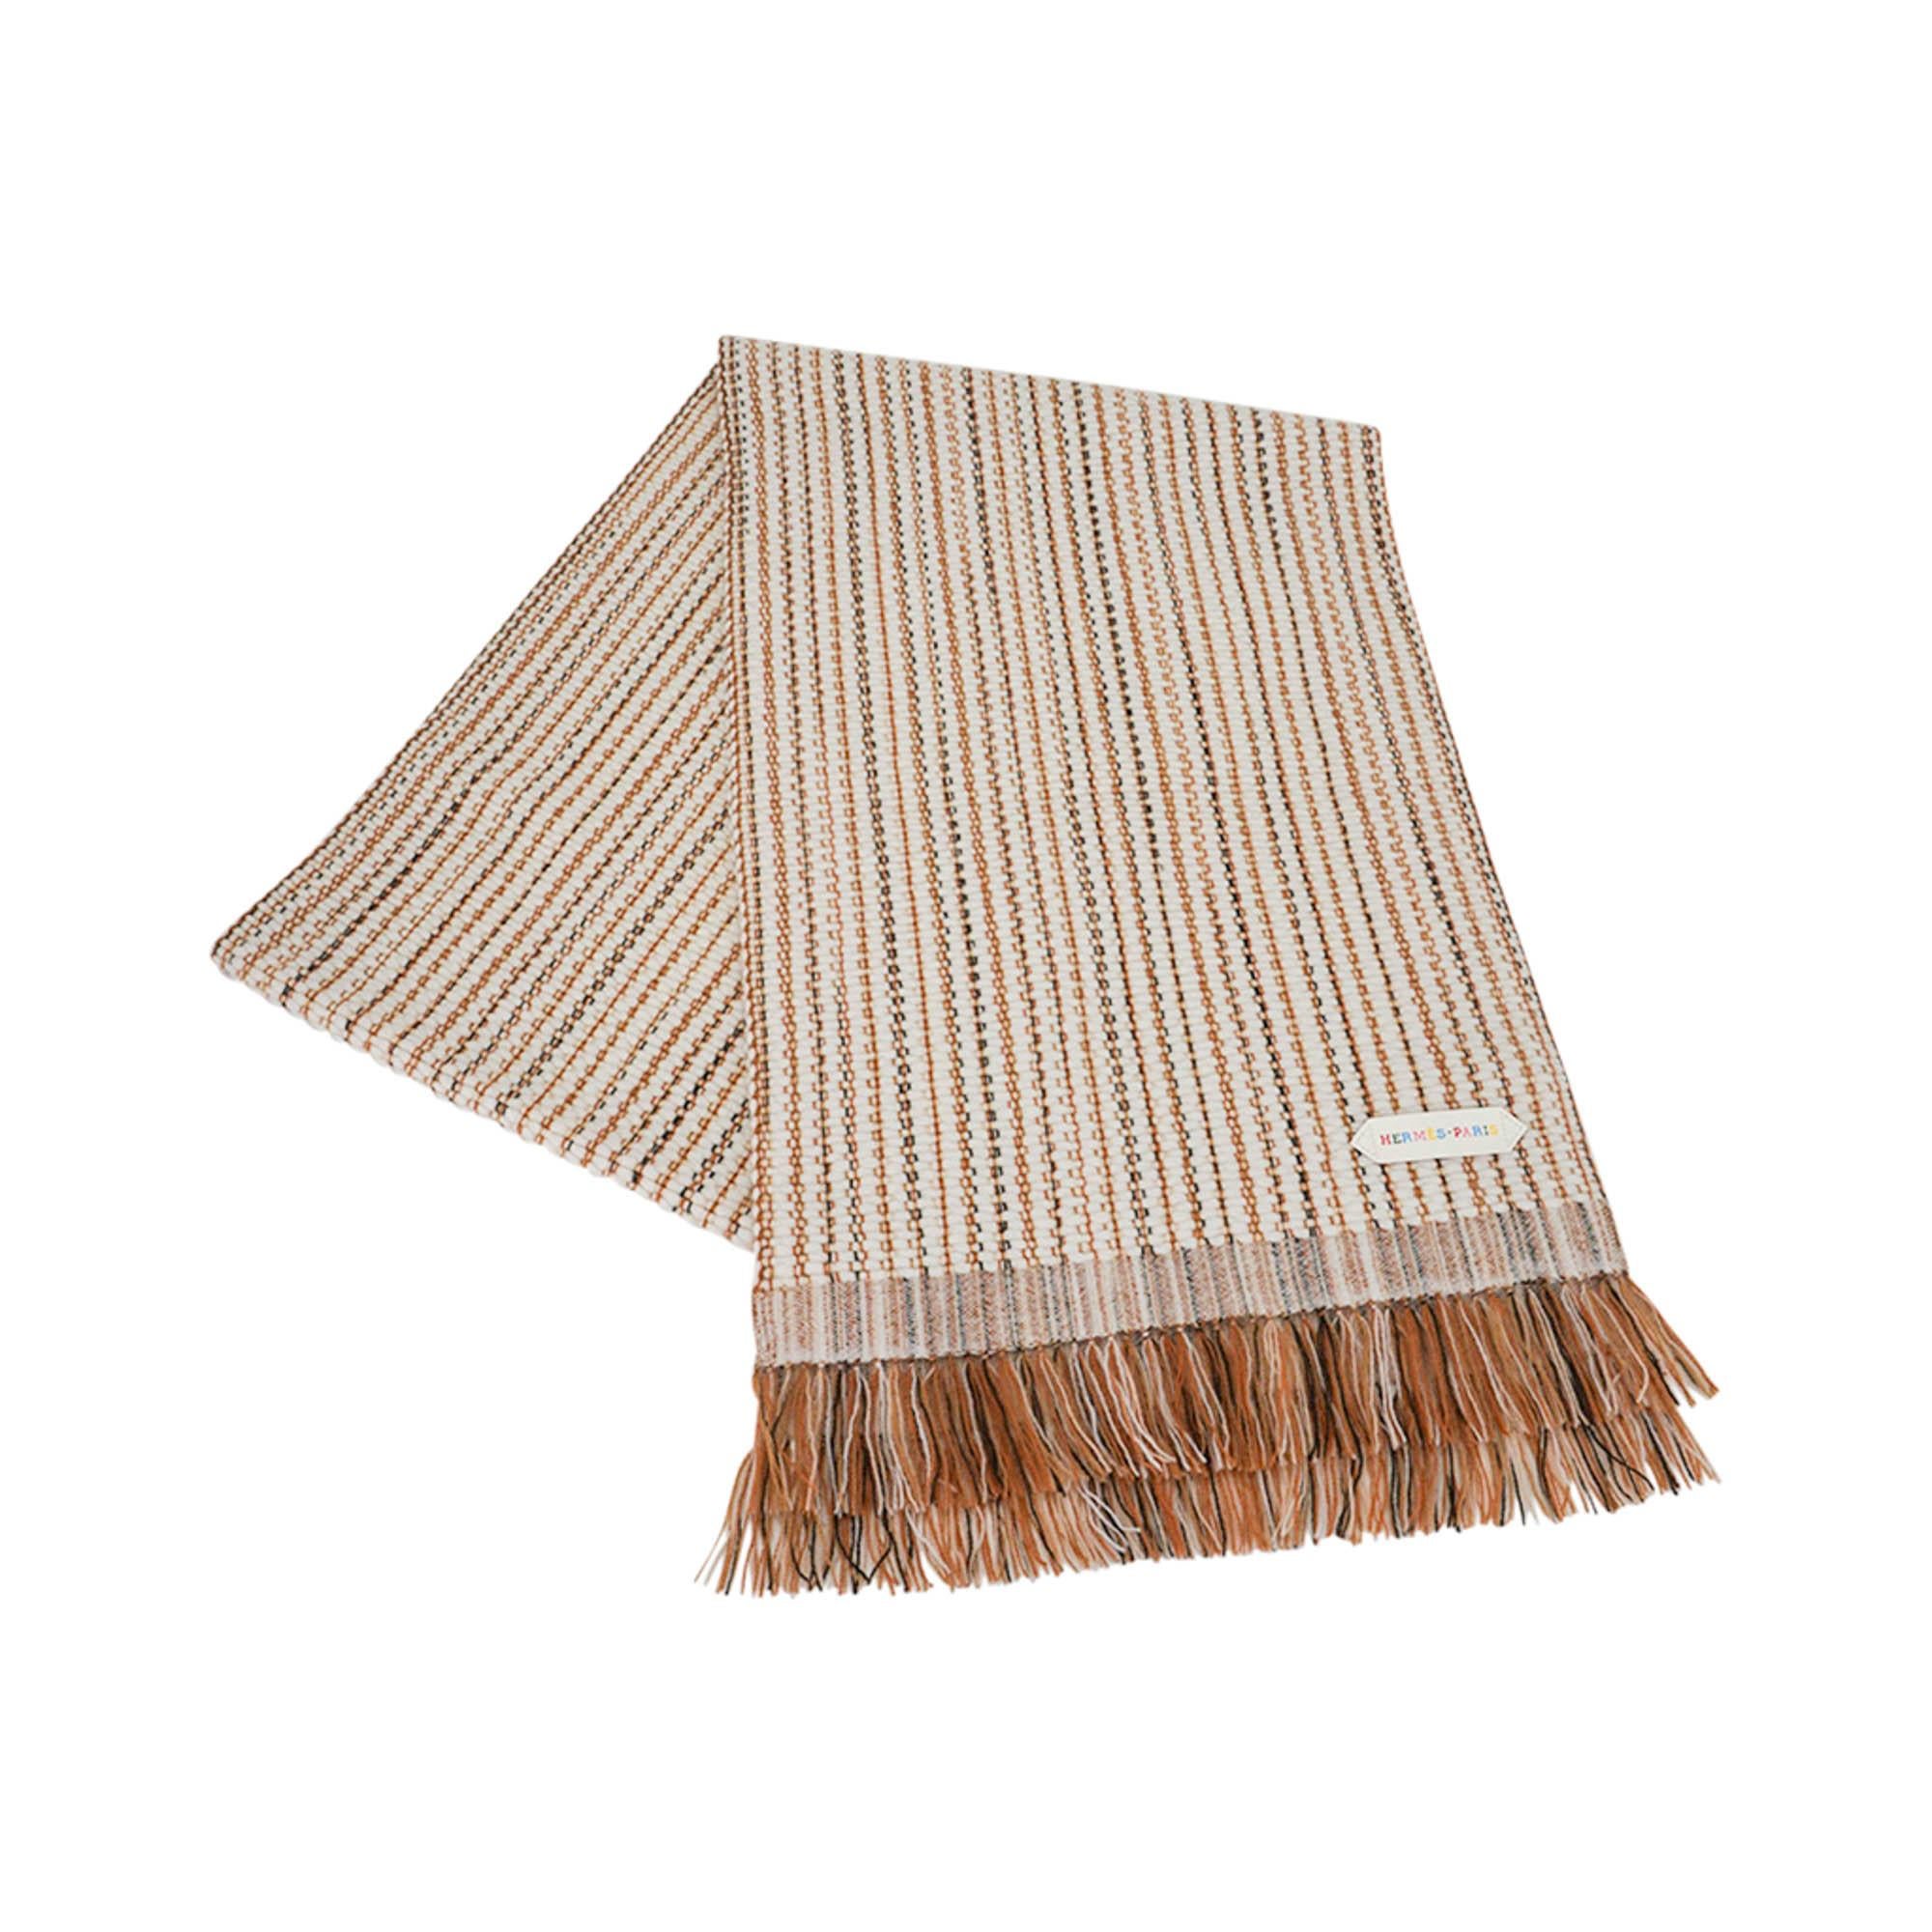 Mightychic offer a Limited Edition Hermes Boutis Cashmere fringe muffler featured in Ecru and Gold.
Inspired by the texture of boutis quilts it is a beautifully detailed weave.
Lambskin printed logo Hermes Paris.
Muffler has a 2